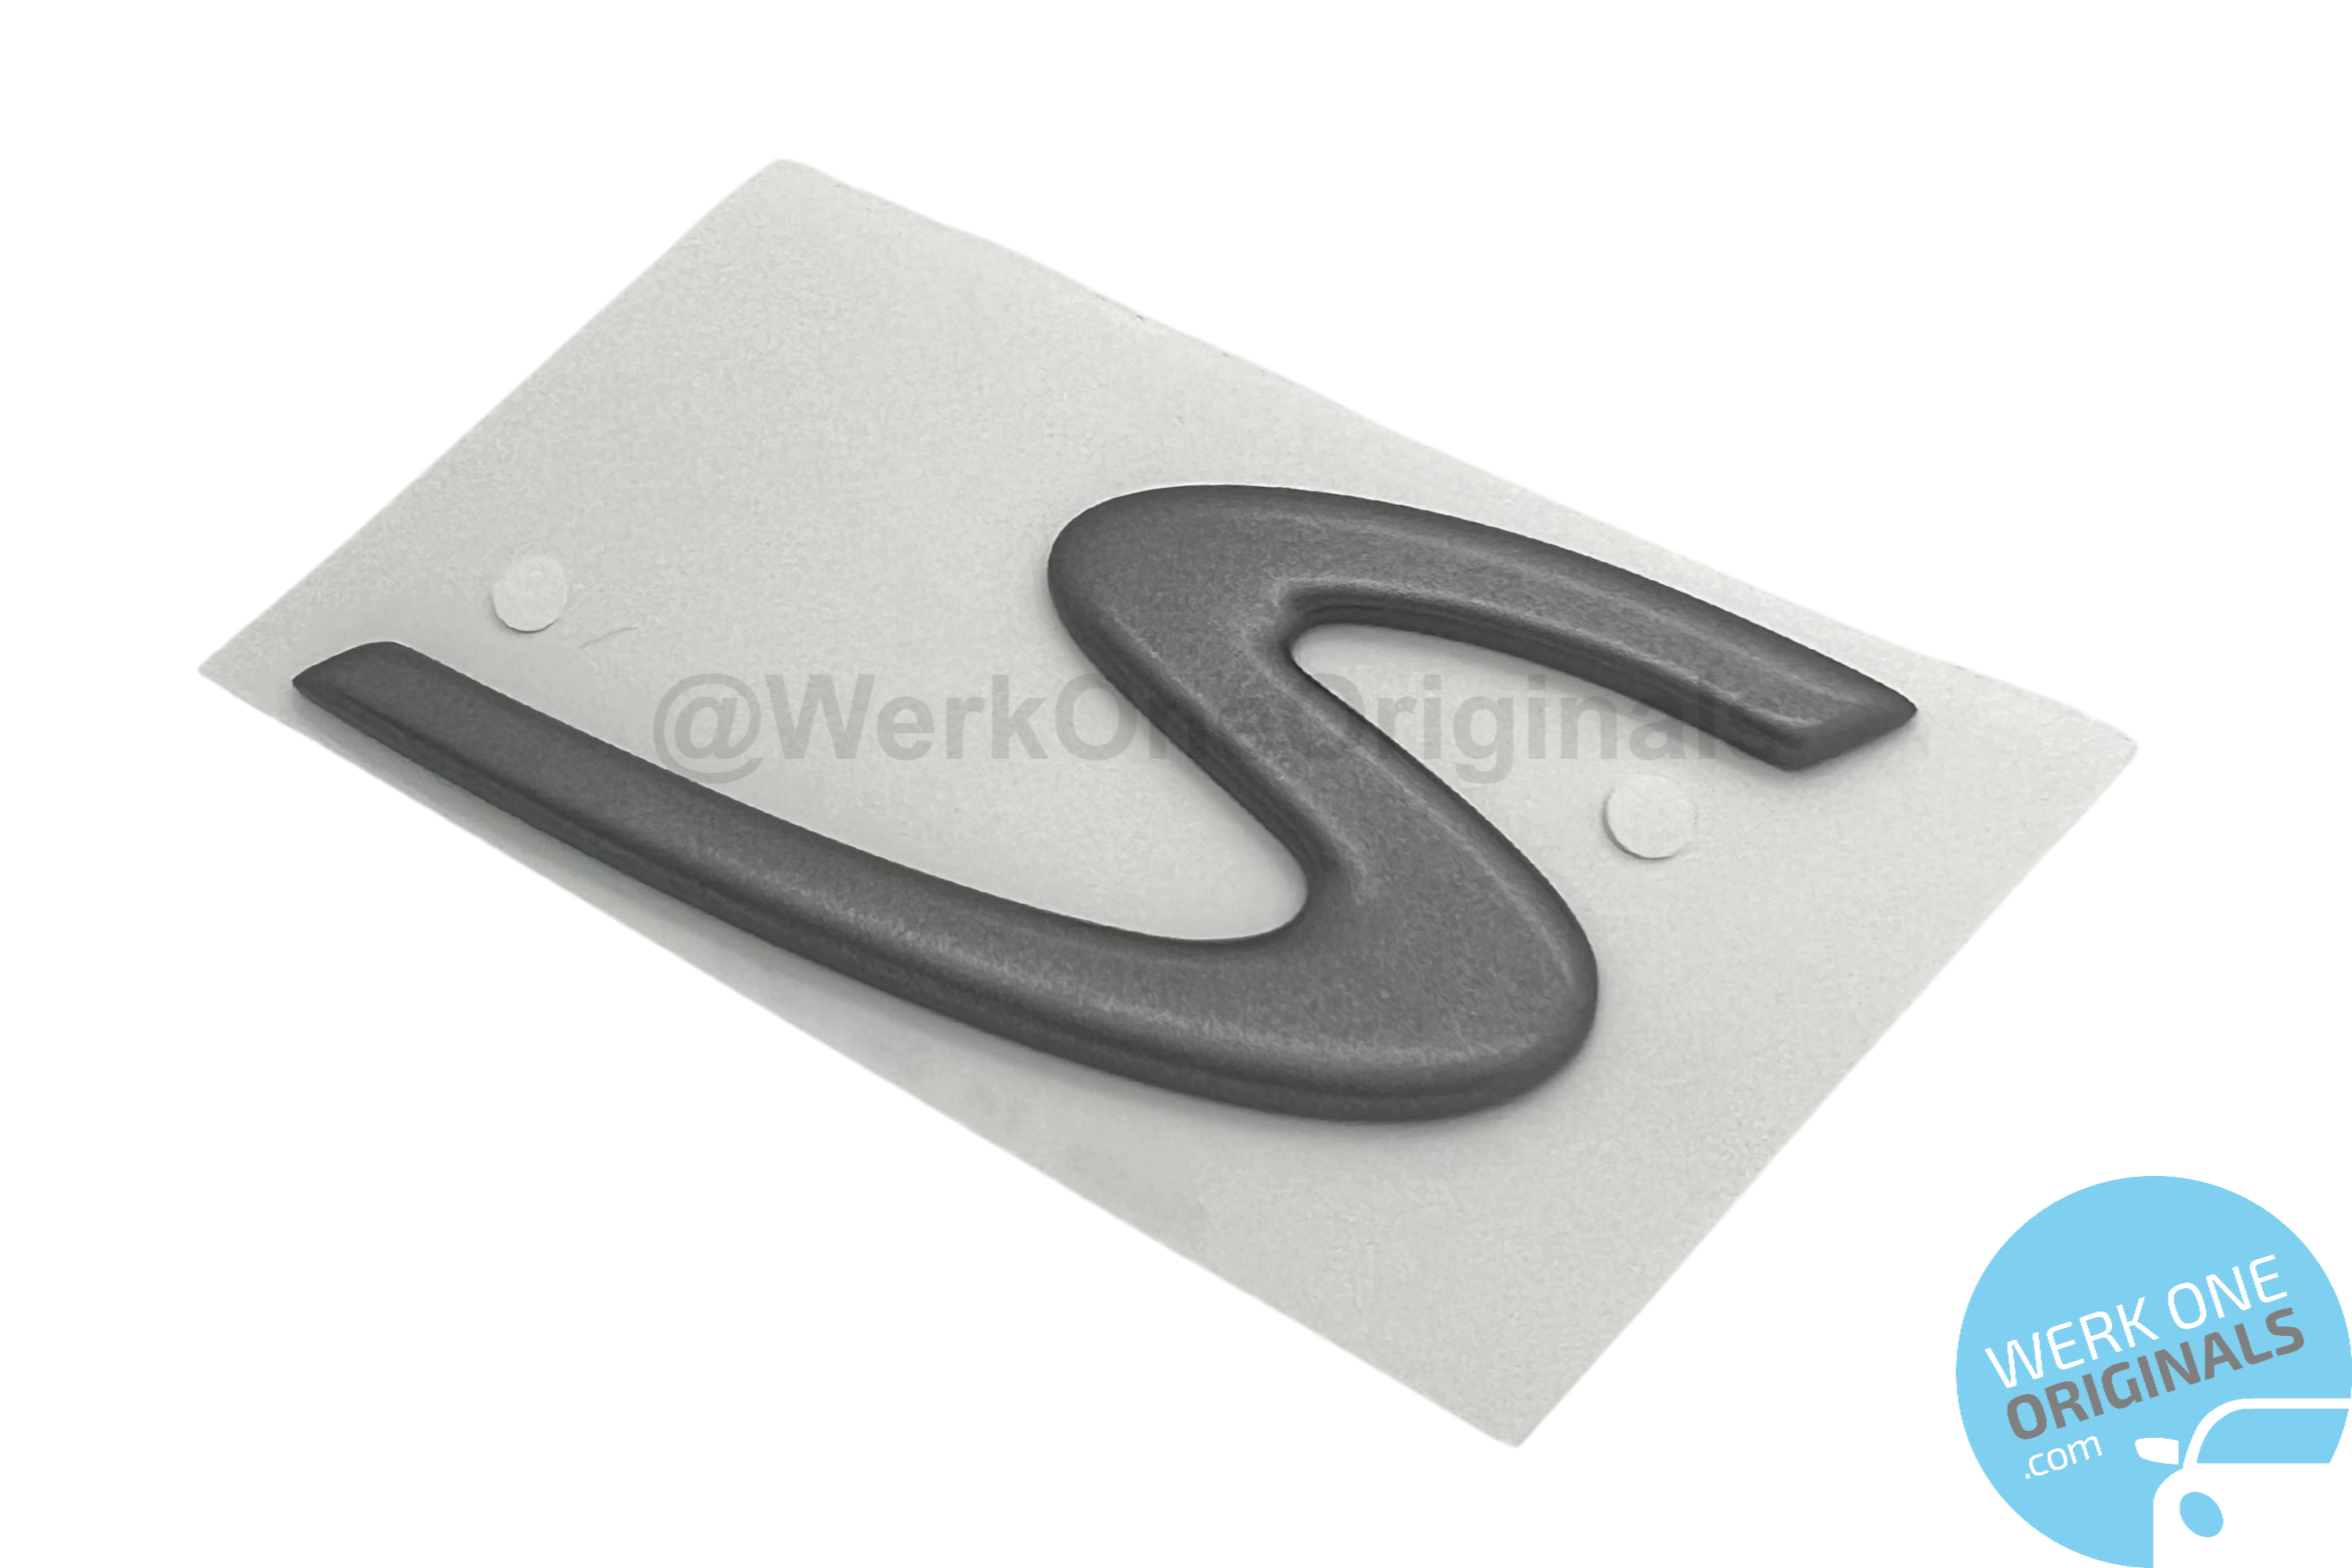 Official Porsche 'Boxster S' Rear Badge in Titanium Grey for Boxster S Type 986 Models